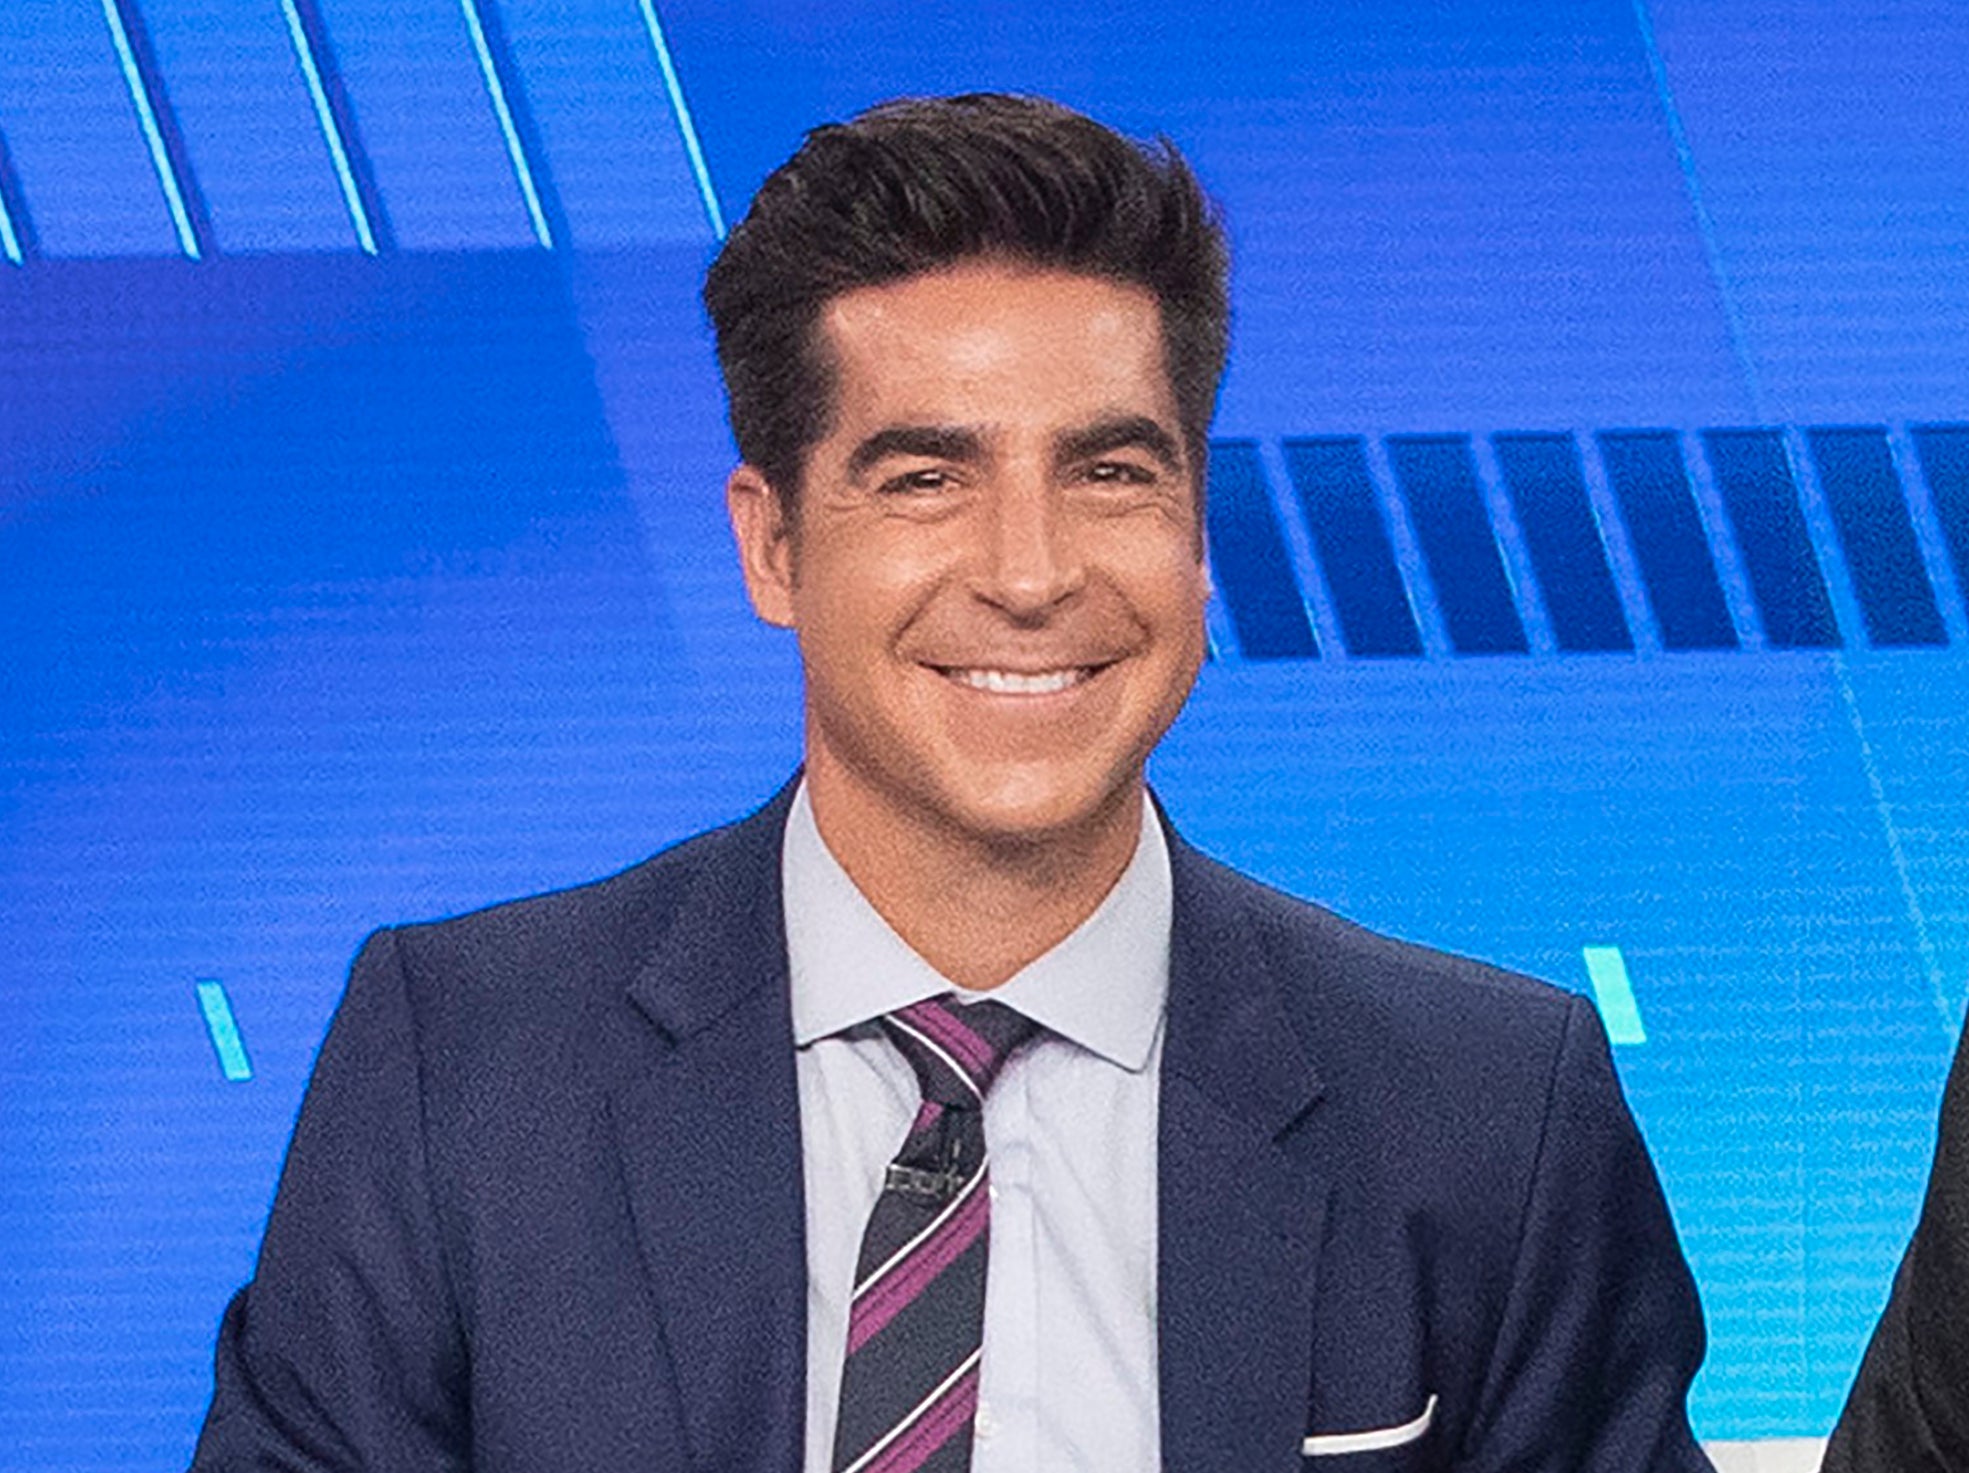 A spokesperson for the White House said the broadcaster ‘owes an apology to every single viewer’ following remarks made by Jesse Watters